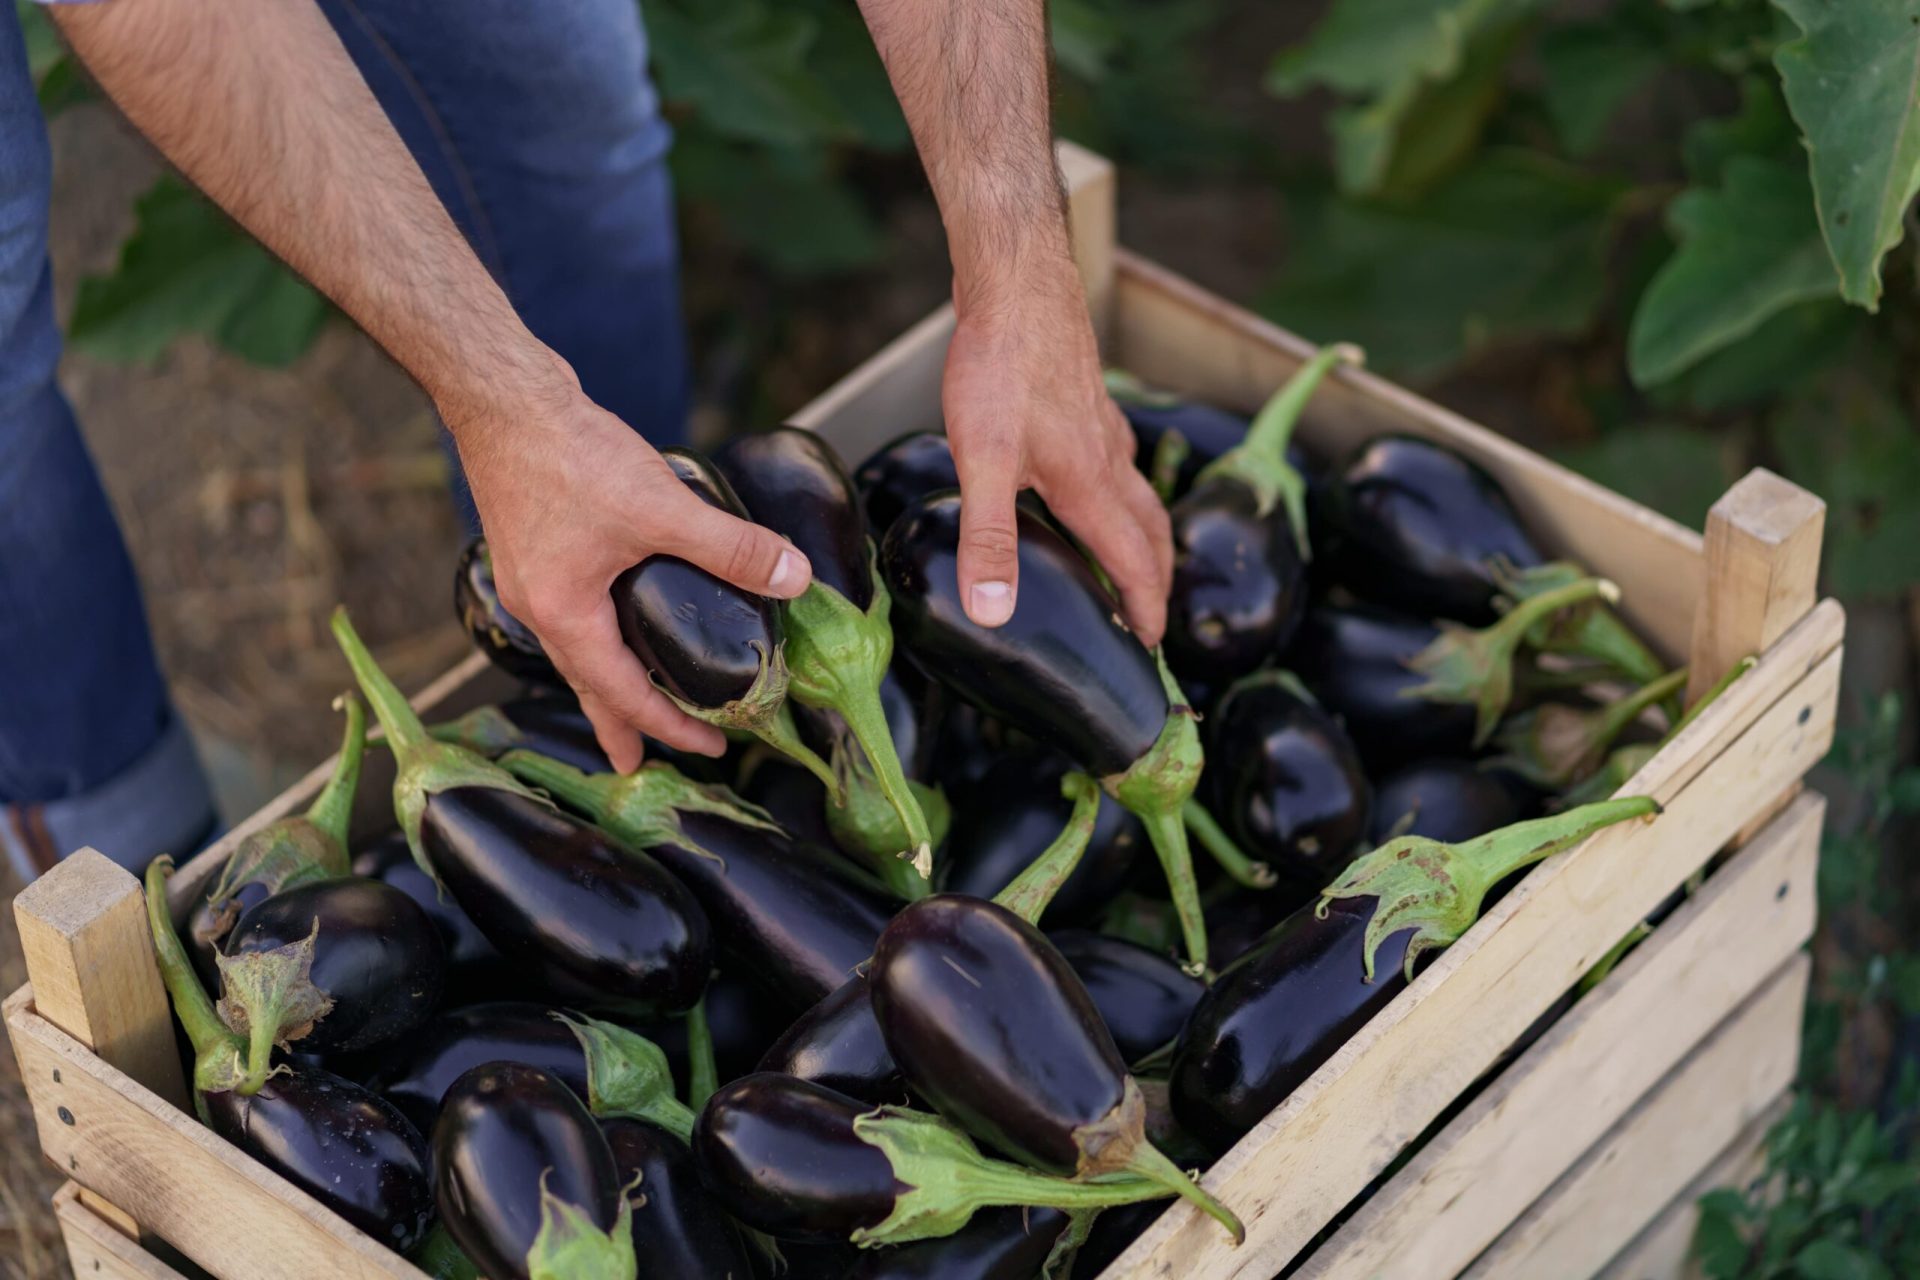 Eggplants in wooden box - eggplant growing guide